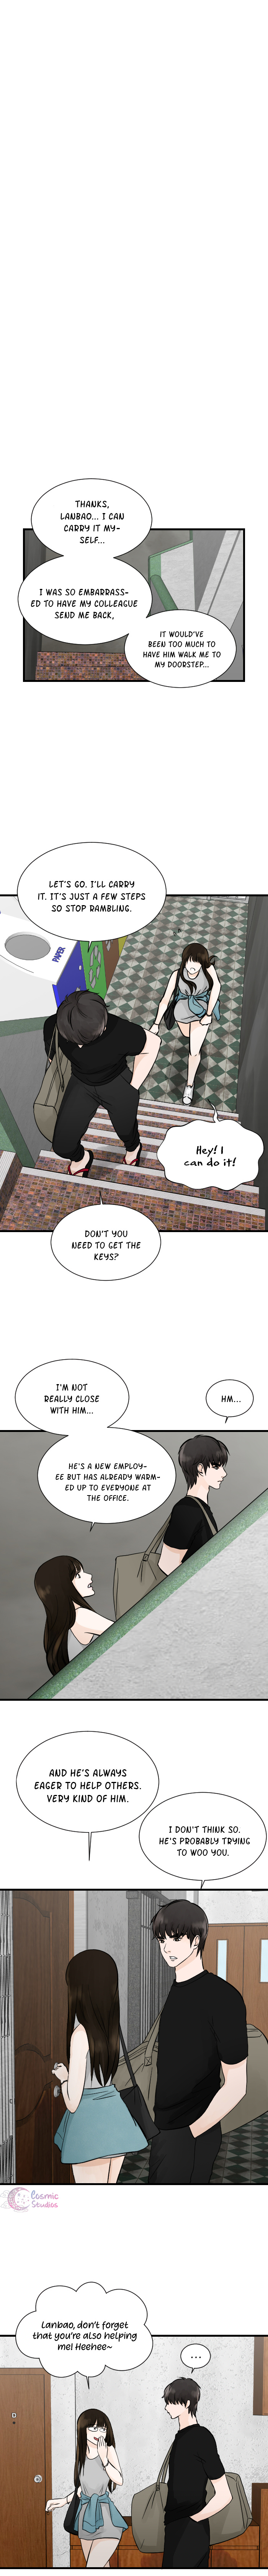 One + One - Page 4